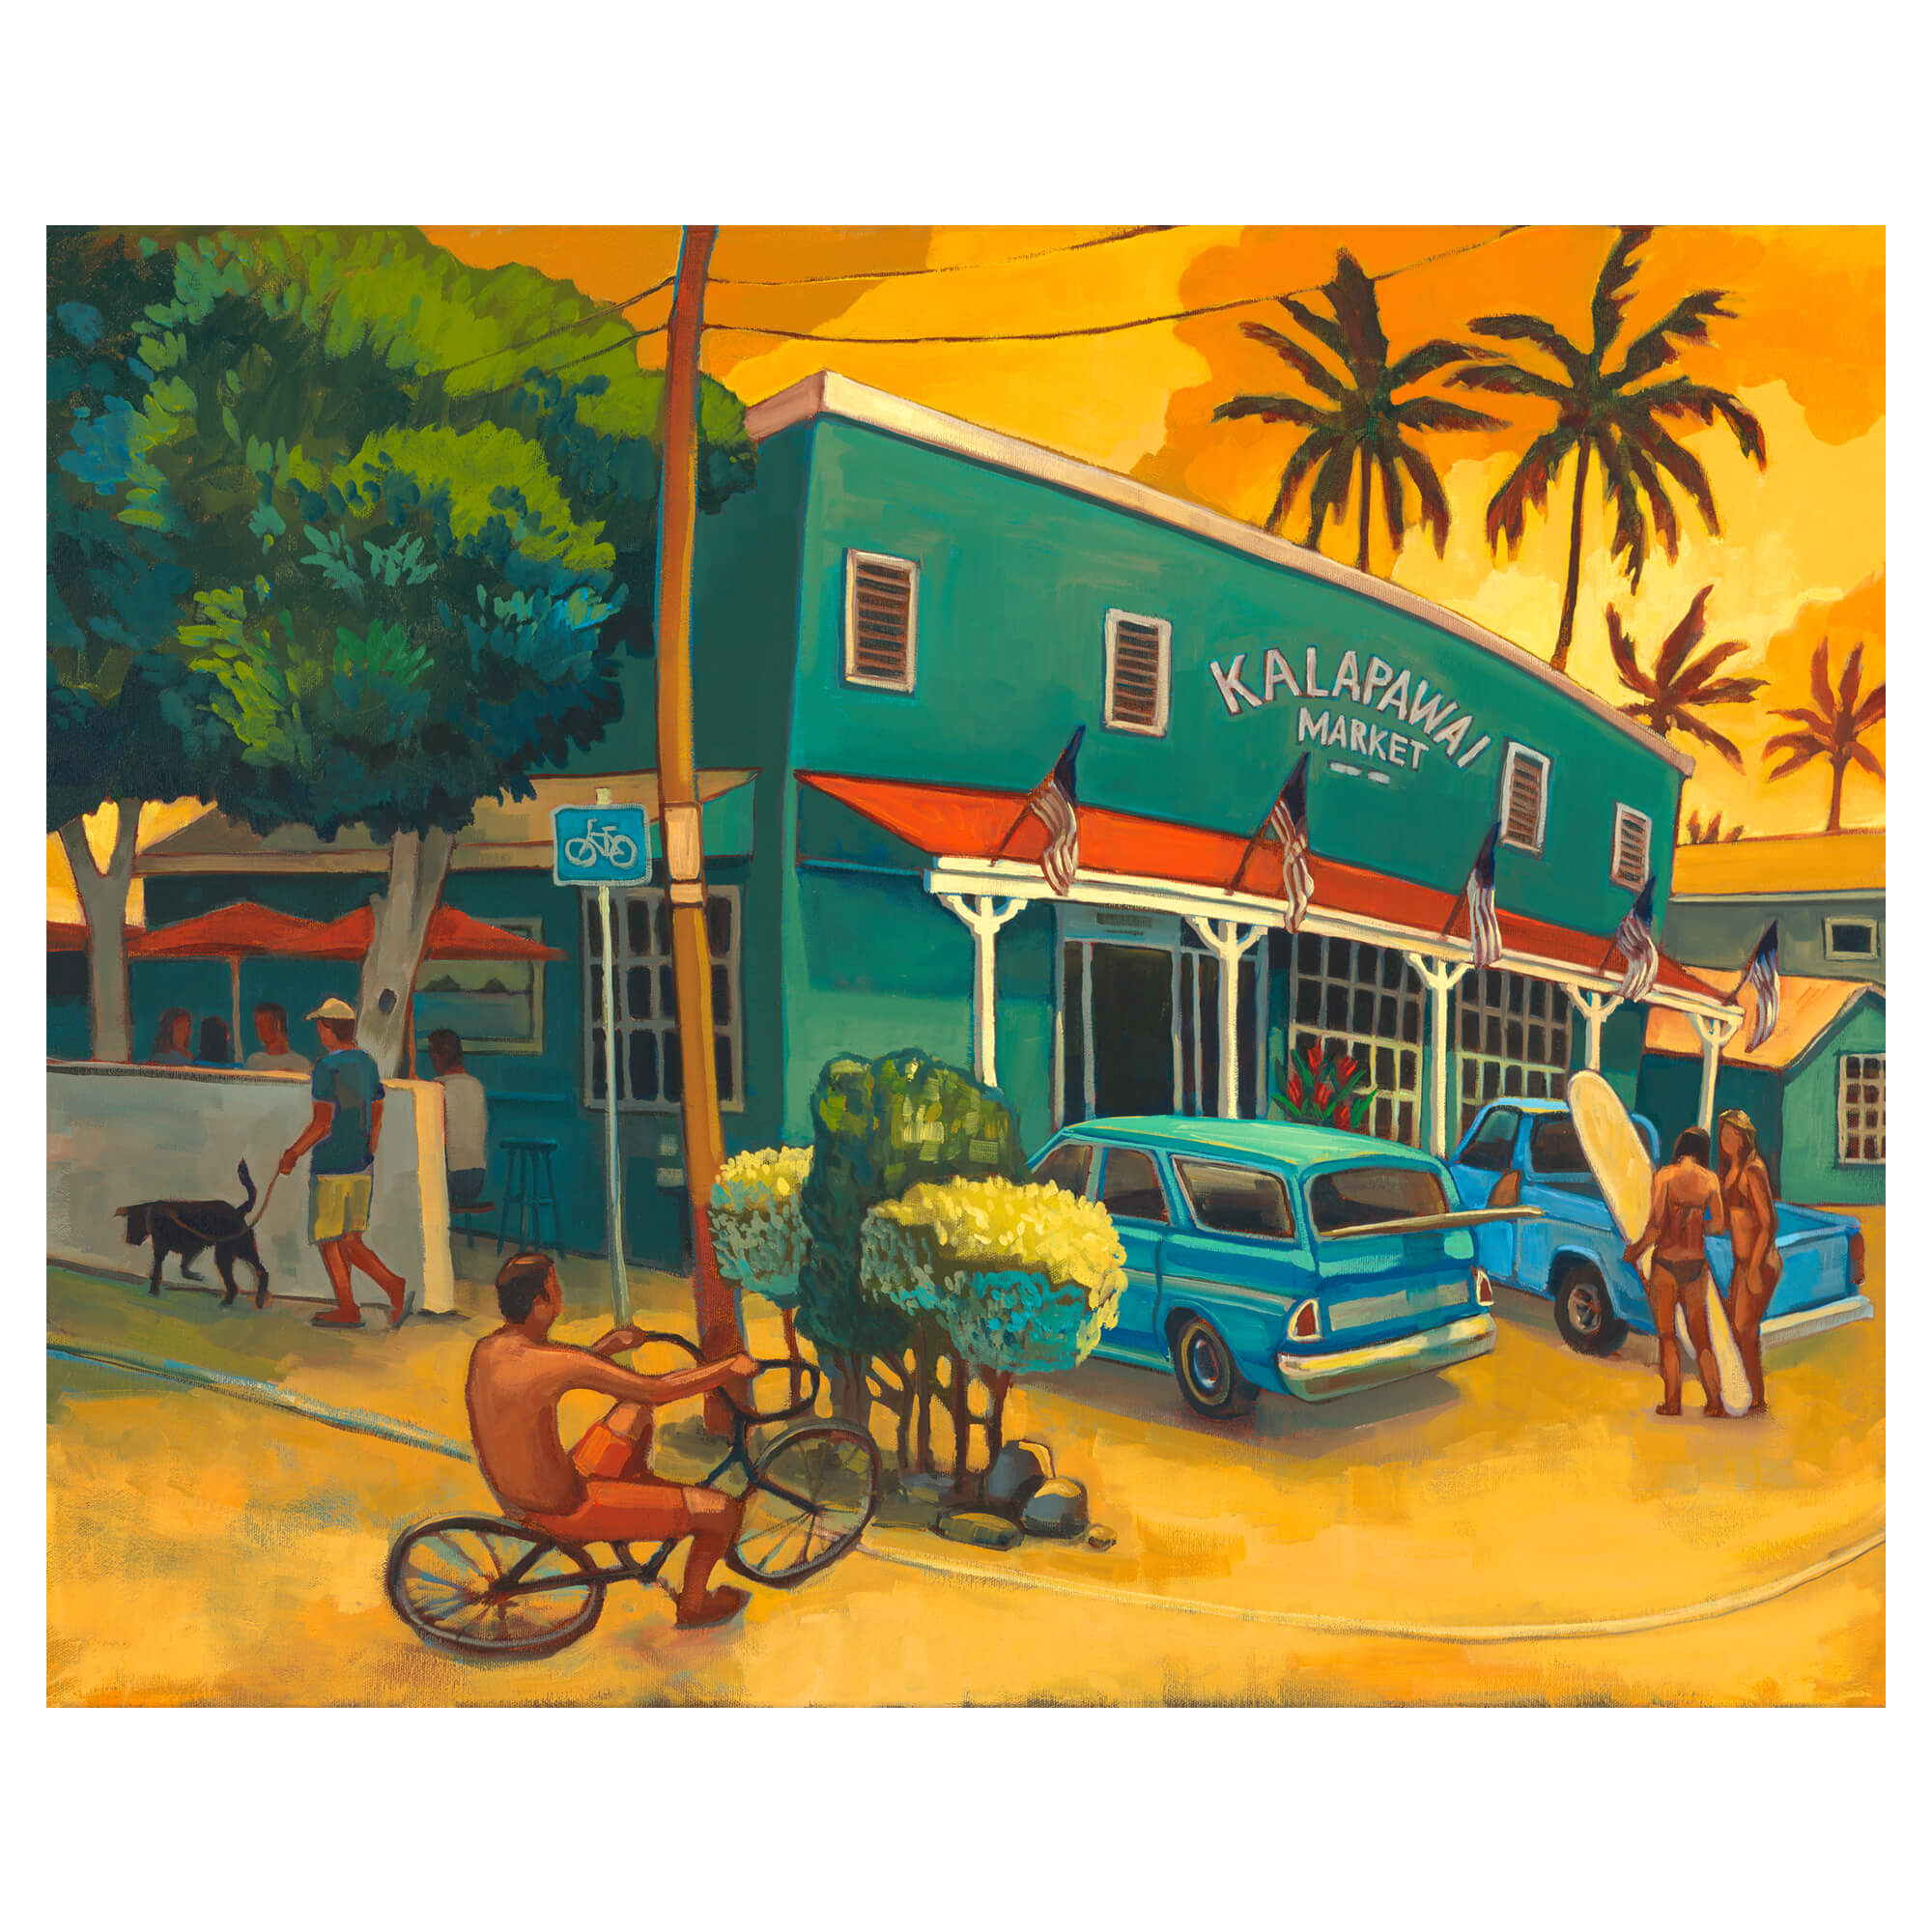 Kalapawai market with surfers and a man on a bike by Hawaii artist Colin Redican